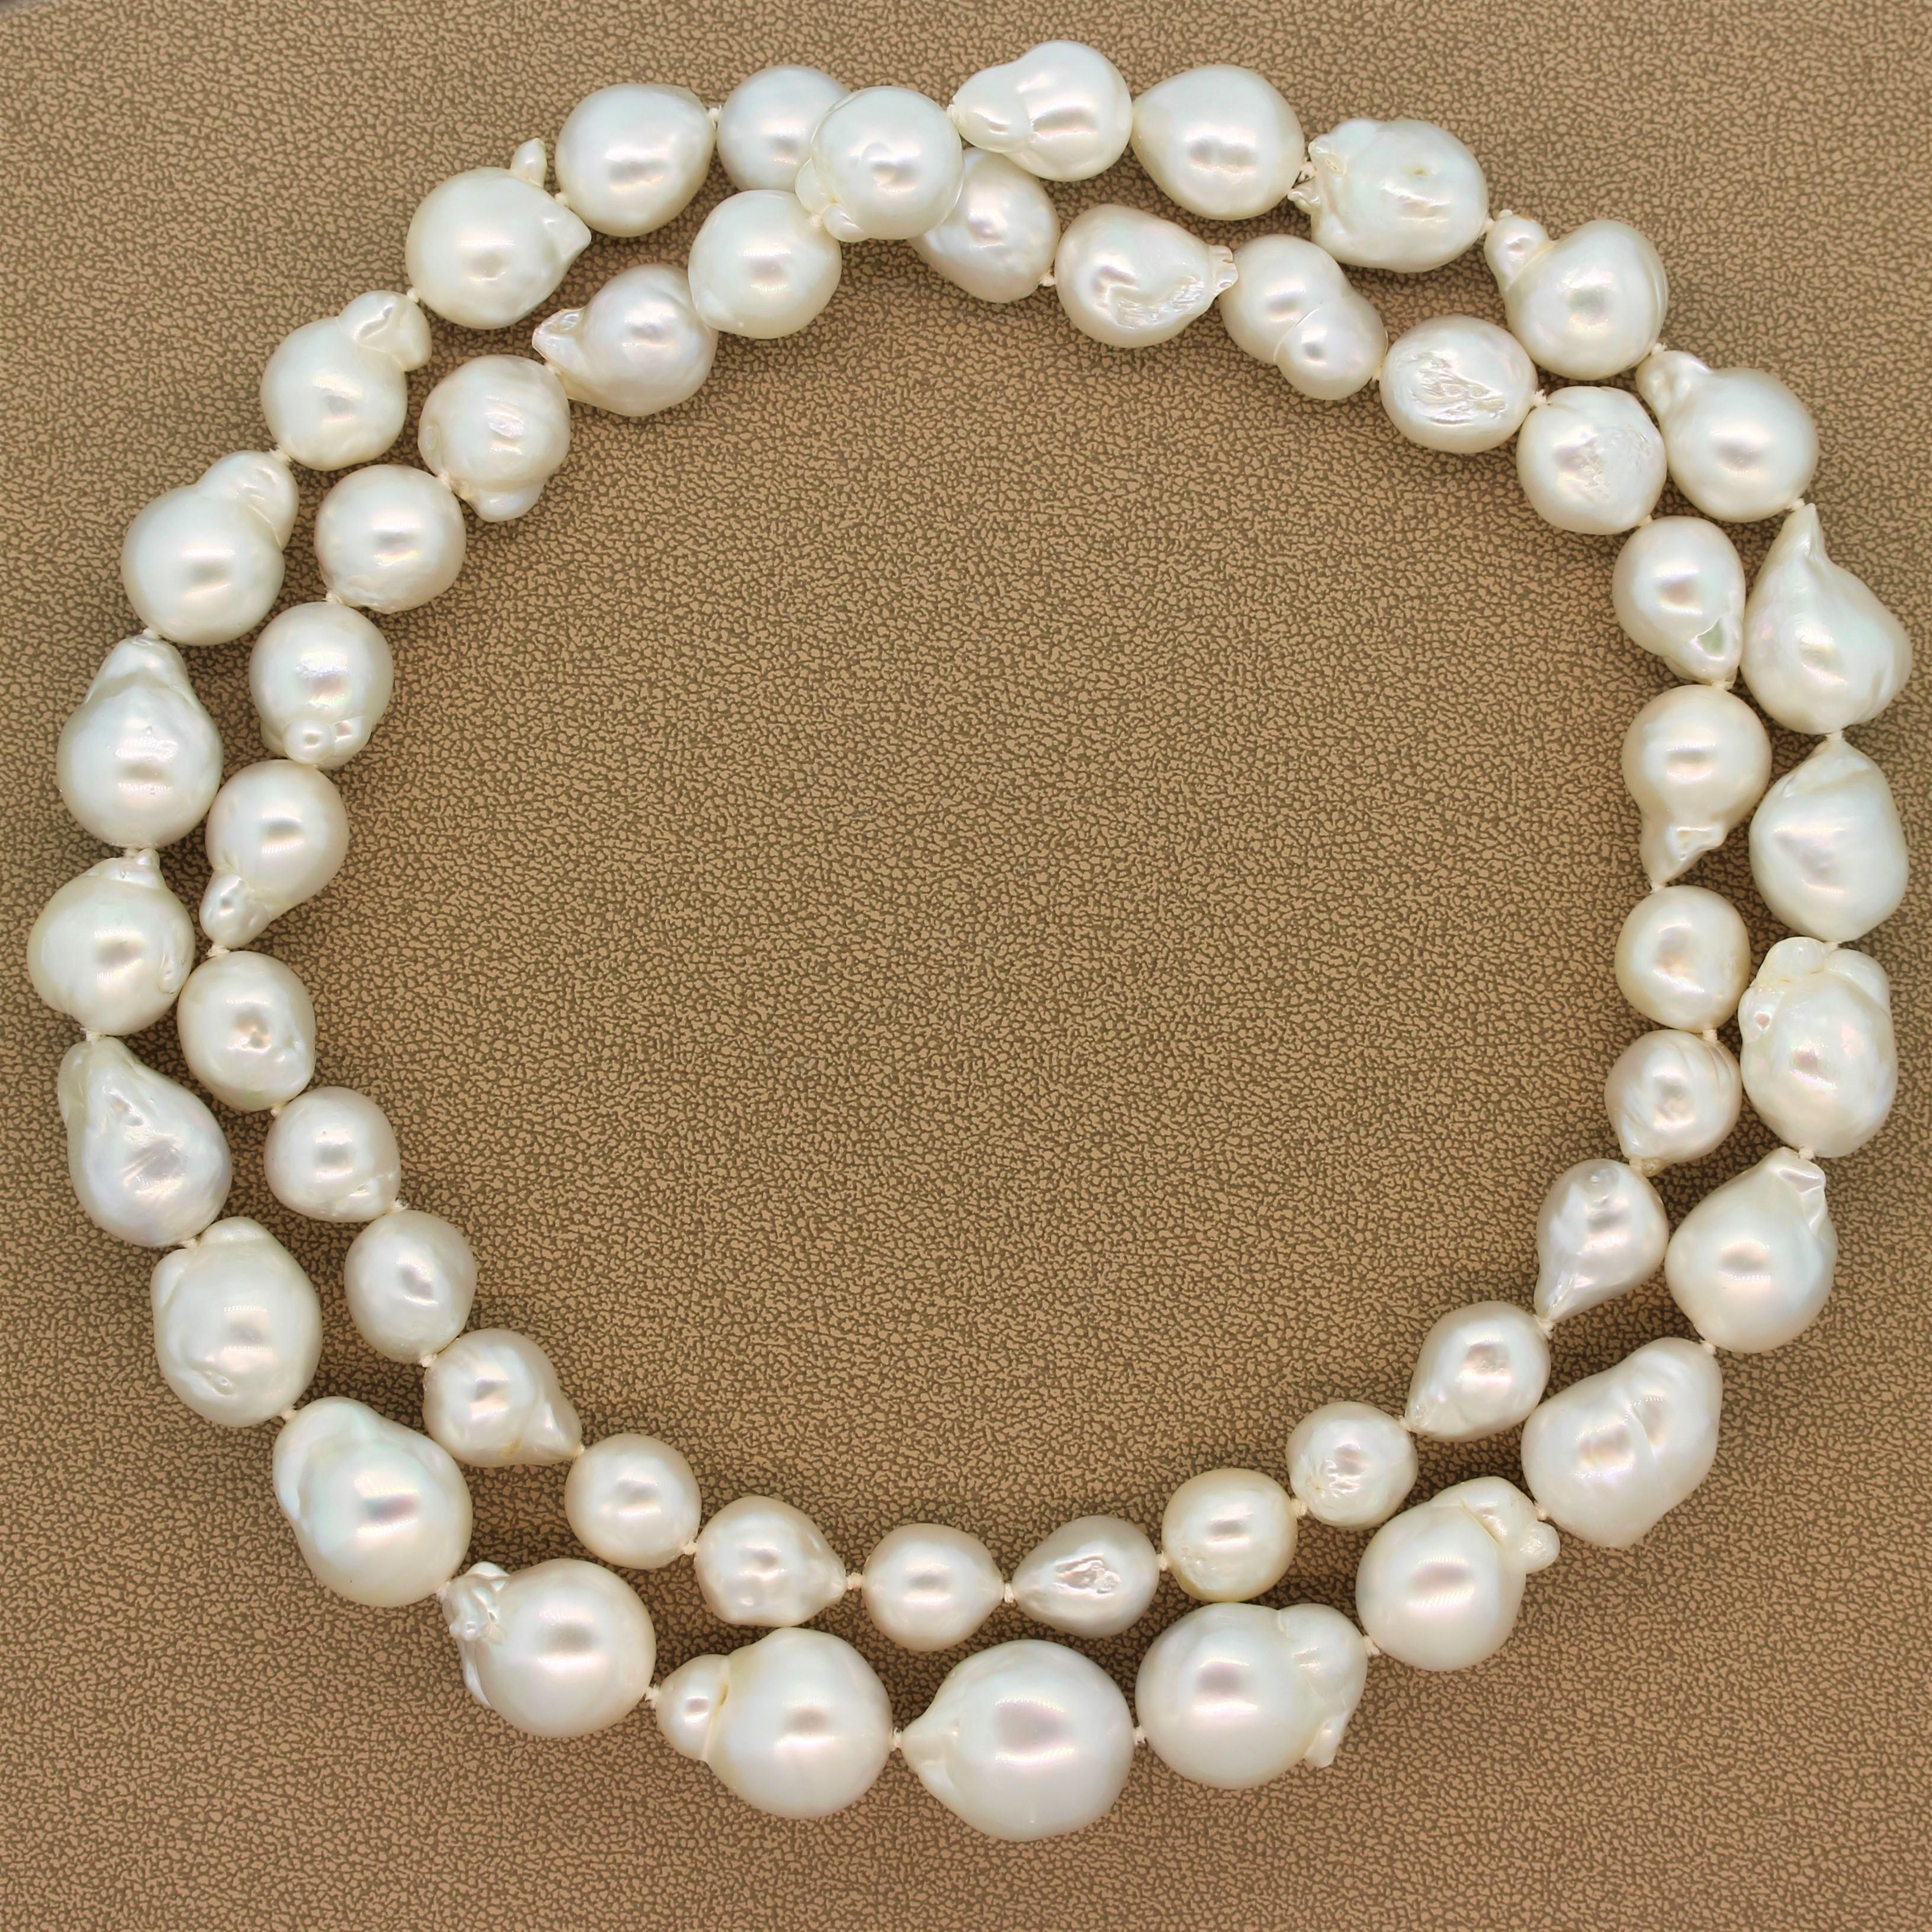 This captivating pearl rope necklace features cultured baroque pearls ranging from 20.05mm-13.20mm. The single stand graduating necklace has a versatile length making it easily doubled to wear shorter or even knotted.  

Necklace Length: 39.00